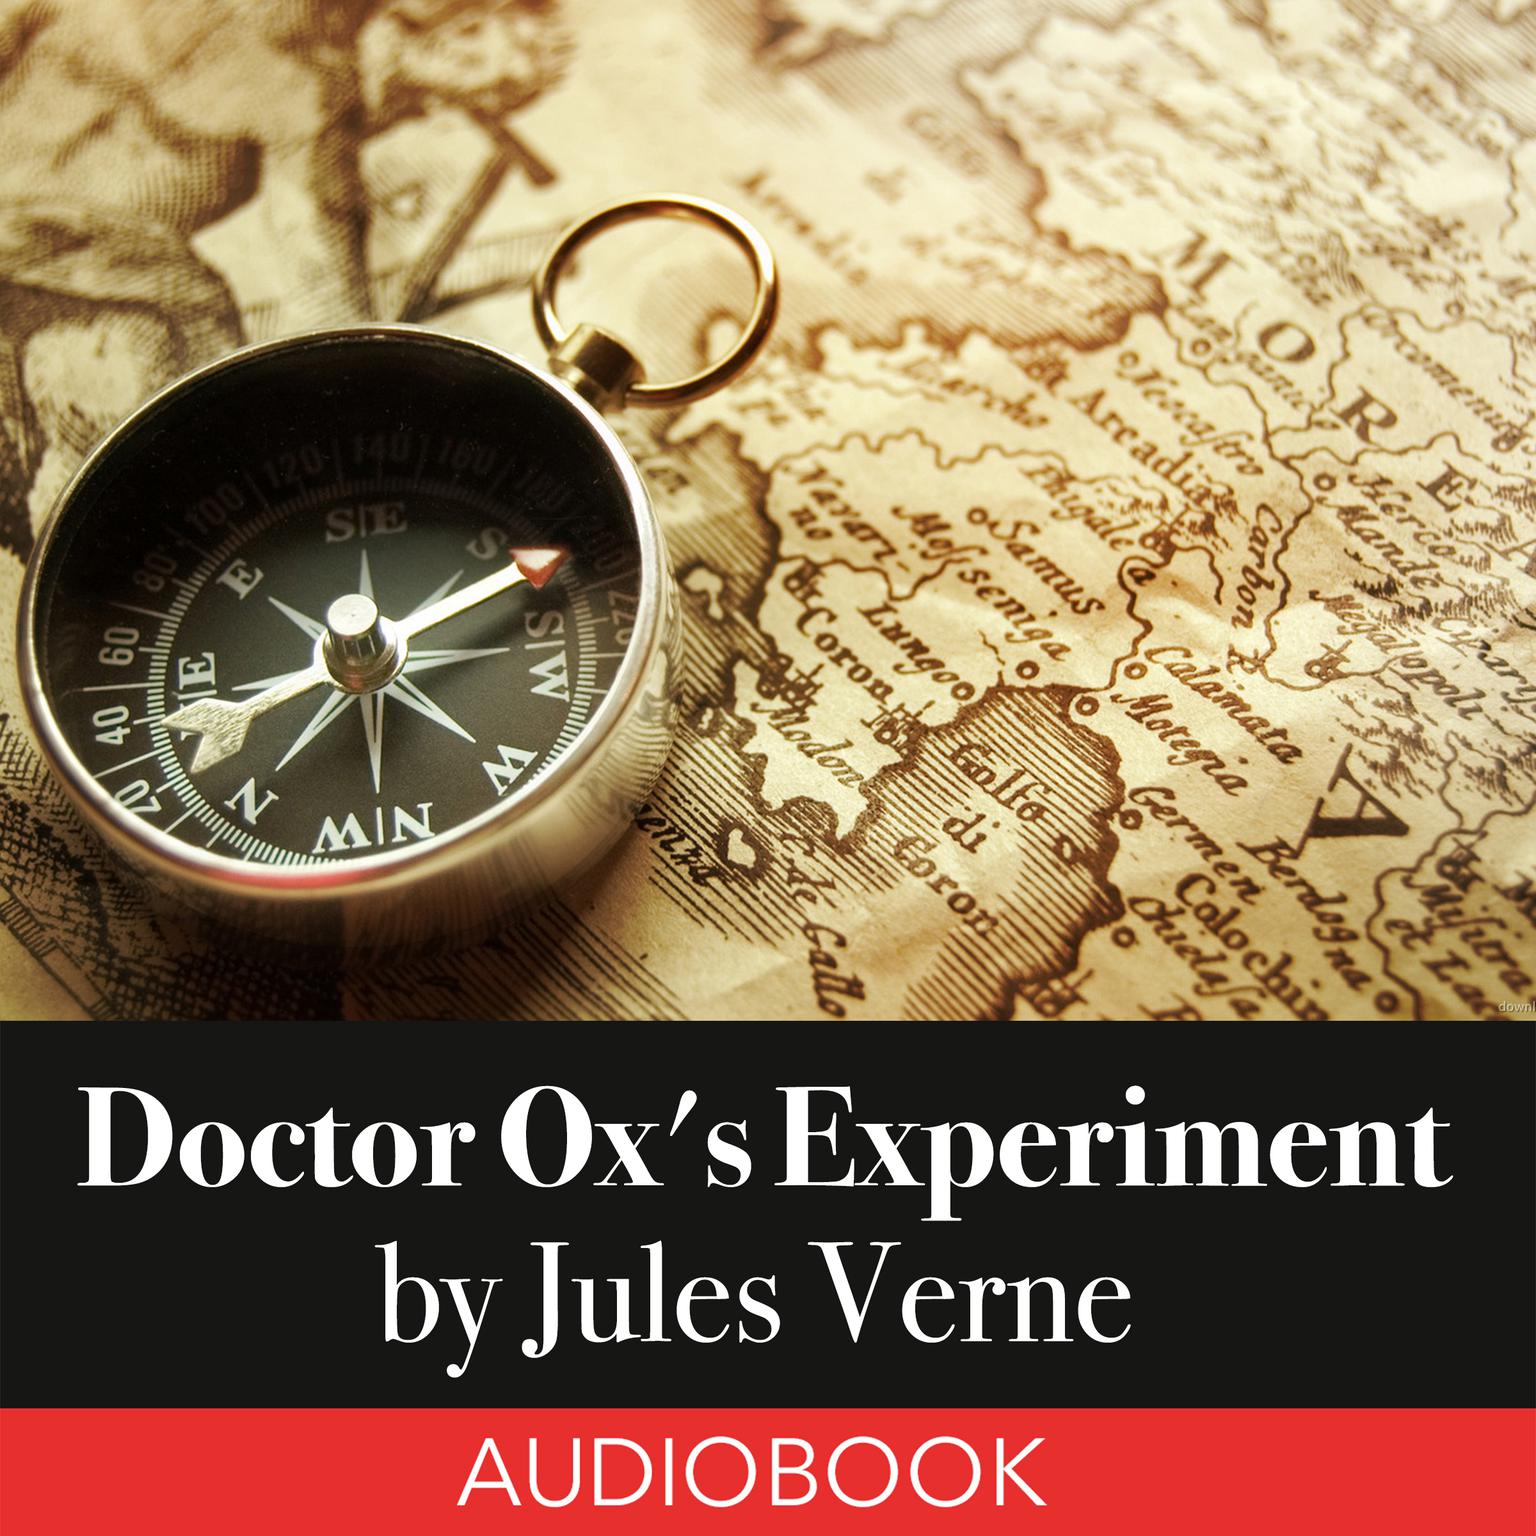 Doctor Oxs Experiment Audiobook, by Jules Verne